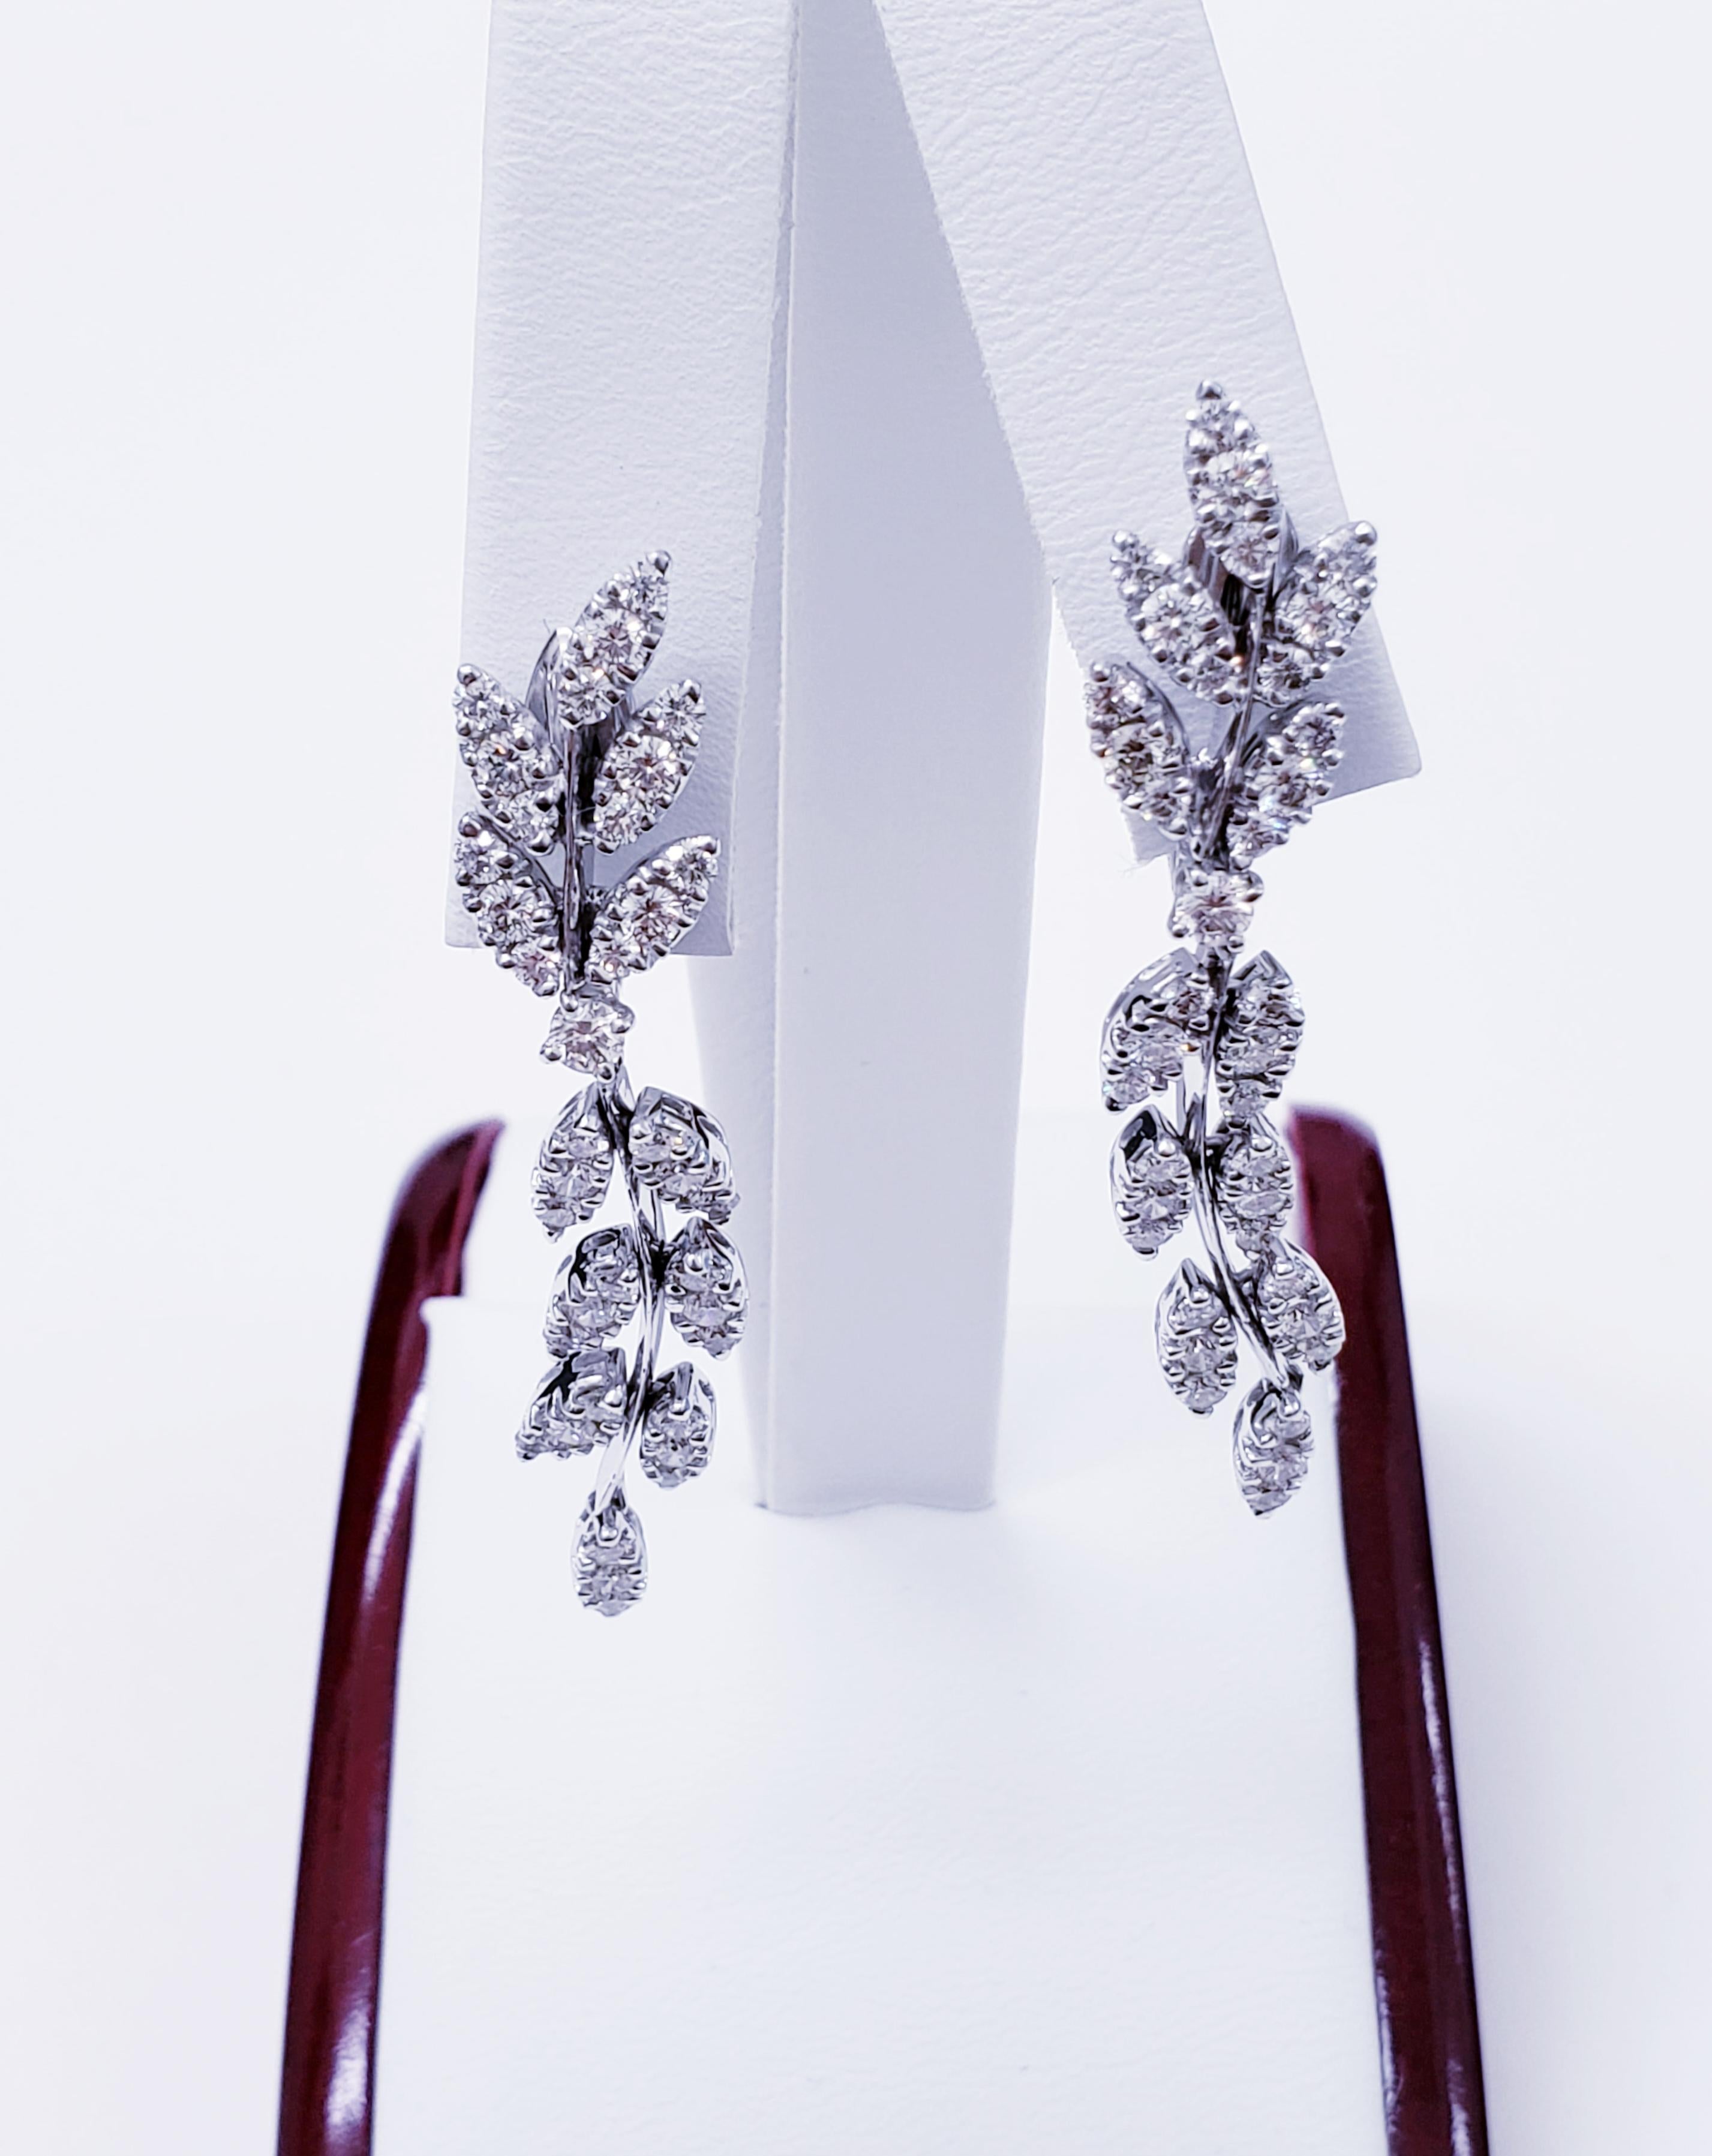 Modern Designer Piranesi diamond leaf earrings in 18k white gold featuring 8tcw (total carat weight) round diamonds. Beautiful deign by world renowned brand Piranessi known for making custom jewelry pieces for the royal families from decades ago.